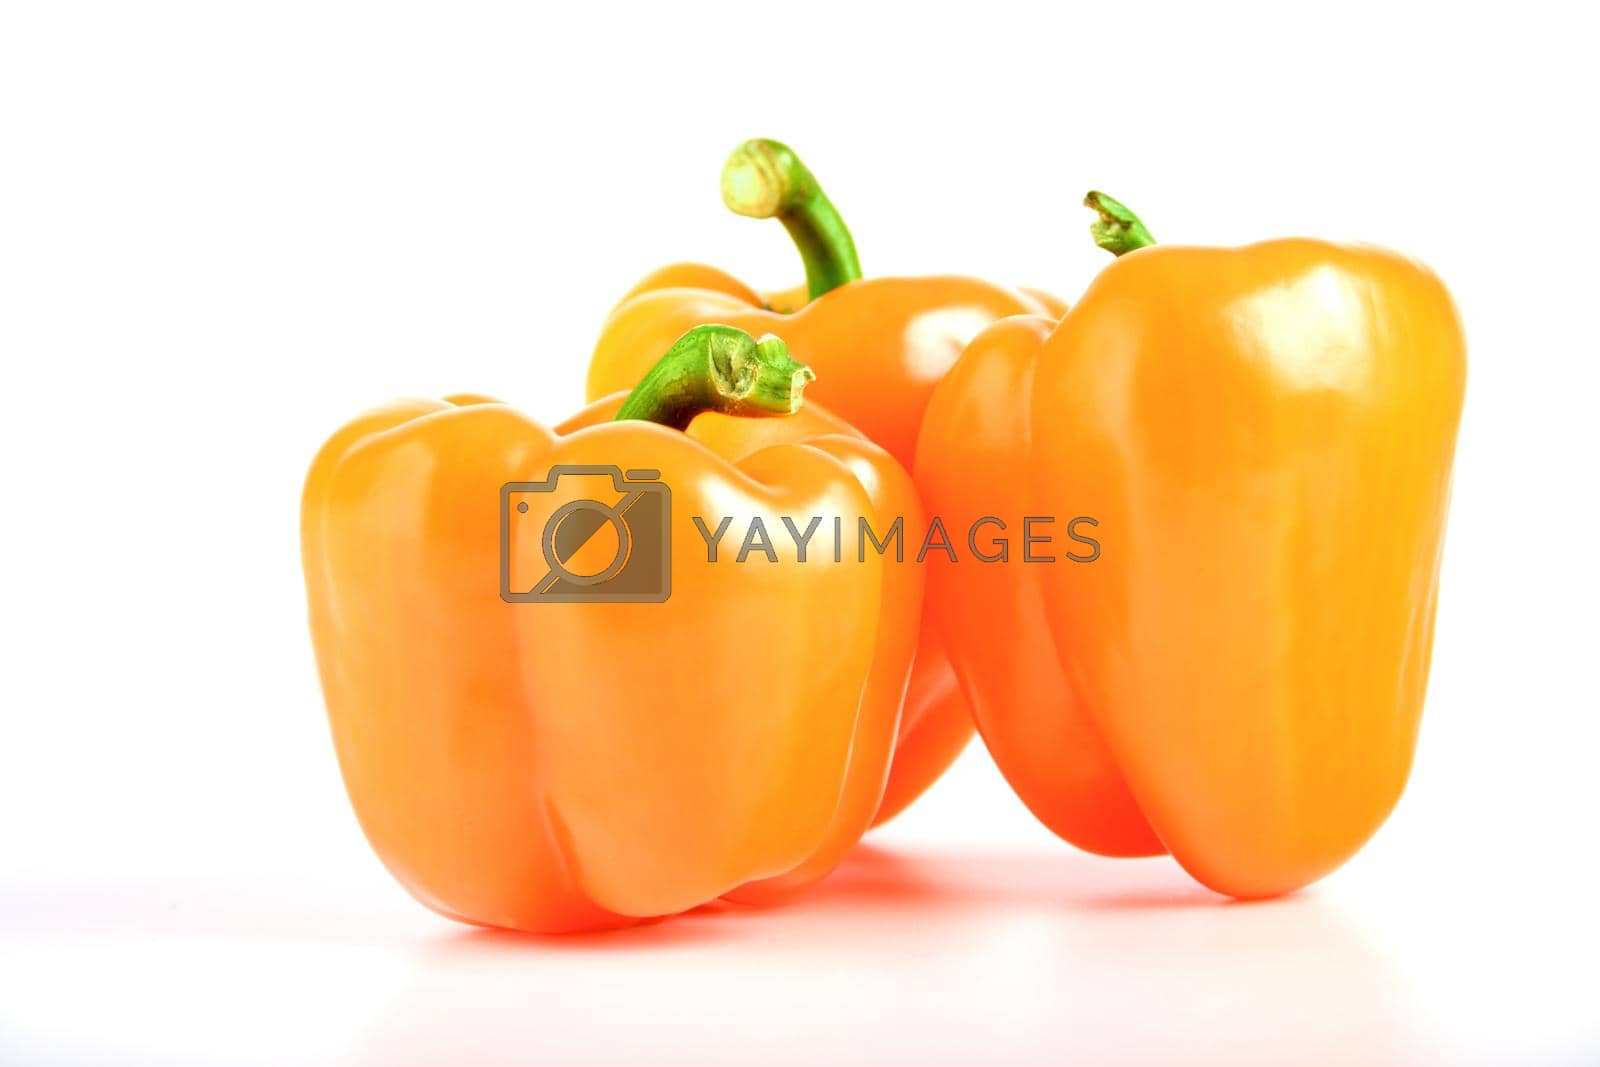 Royalty free image of Paprika by moodboard